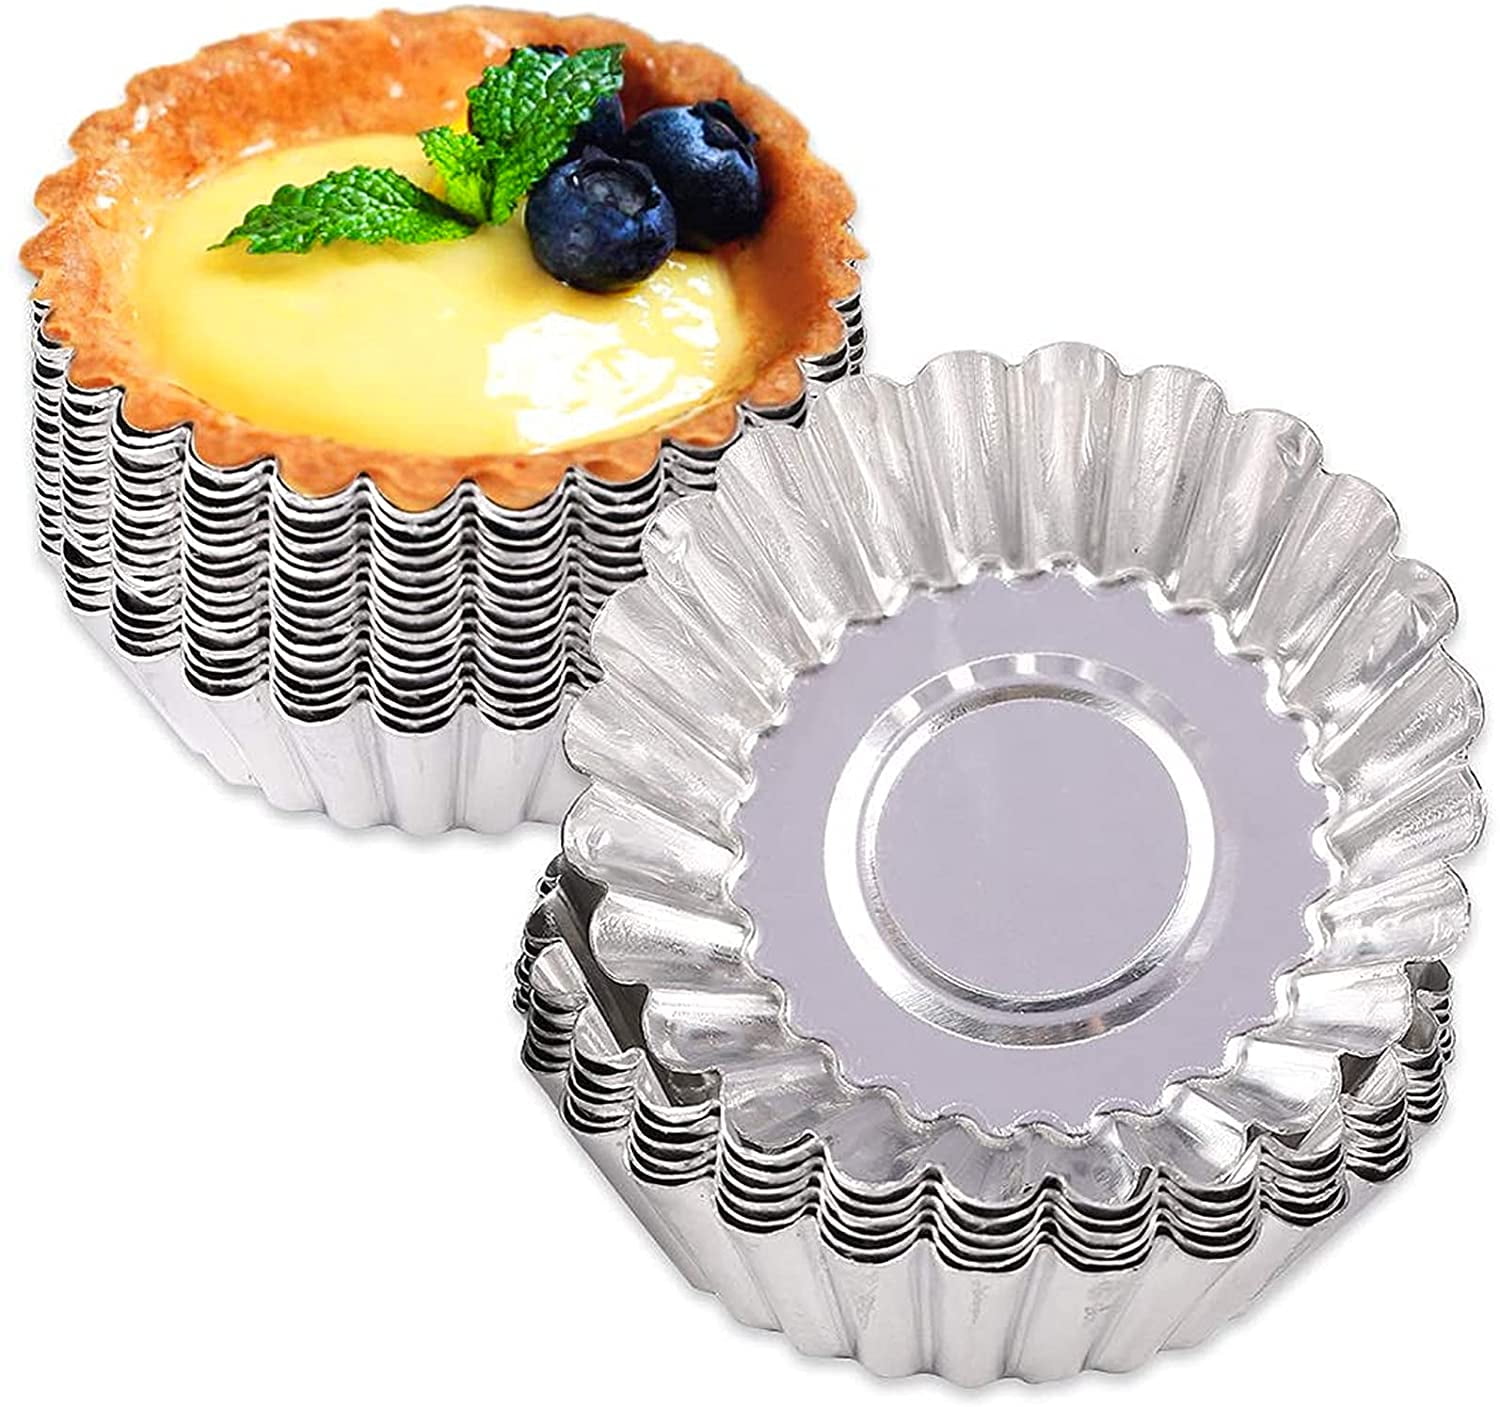 Mini Quiche Tart Desserts Pan VALORILIMIT 24-Pack Egg Tart Molds 3-Inch Dark Grey Carbon Steel Muffin Cake Cupcake Cookie Pudding Mold Reusable Baking Cups 